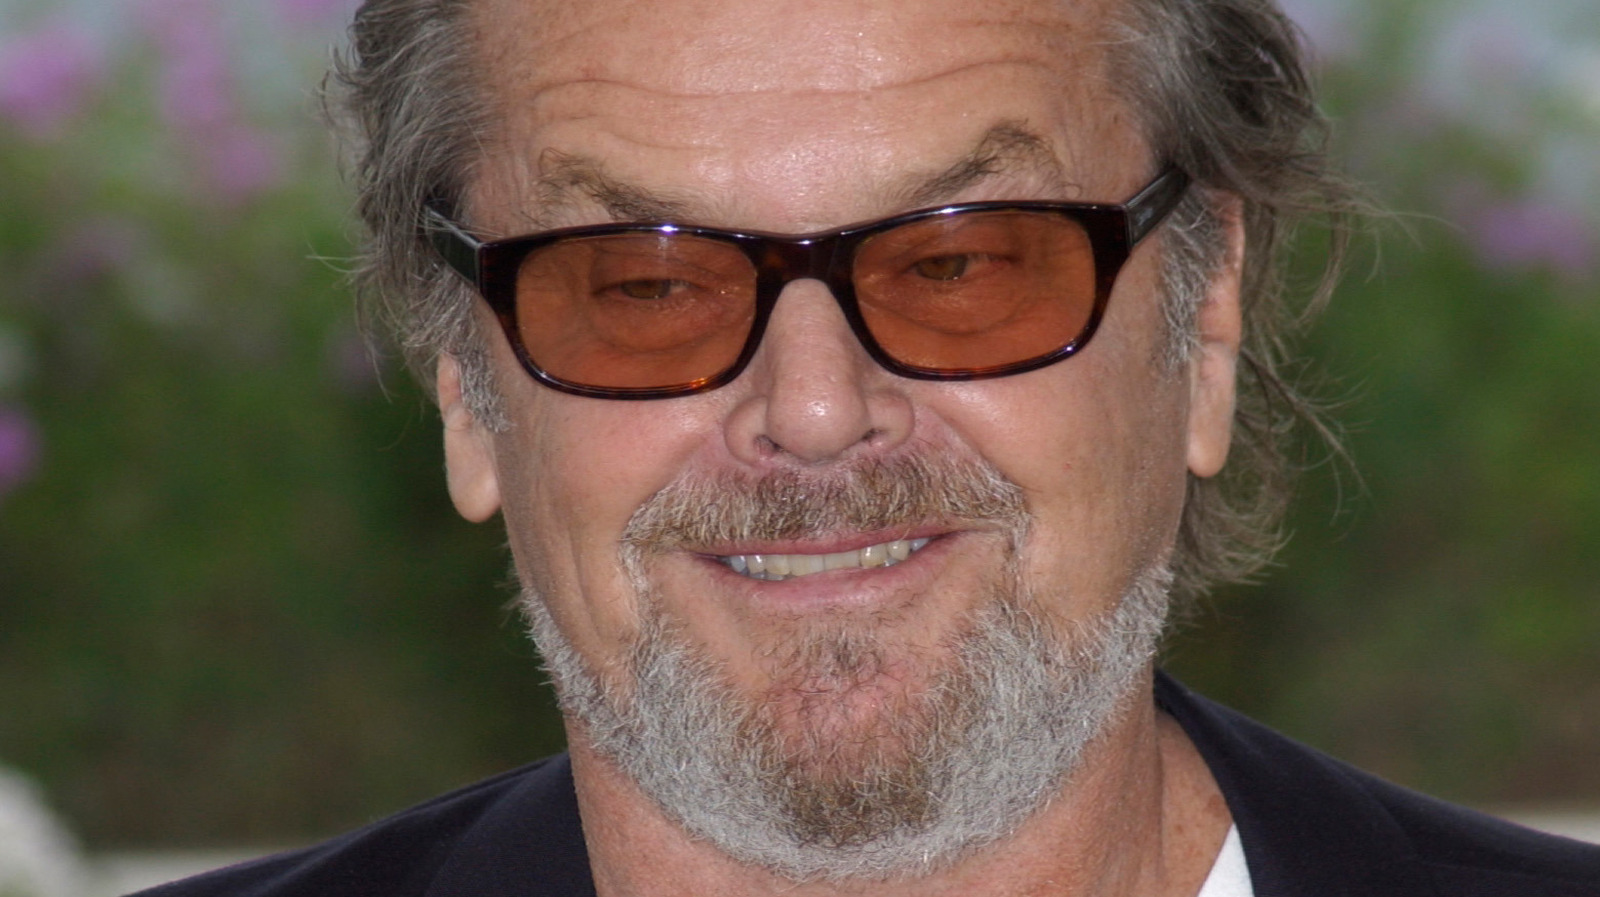 “The Departed” star Jack Nicholson does his best for his five children. In his late 80s he keeps very close bond with his youngest “fabulous” blonde daughter and handsome son.